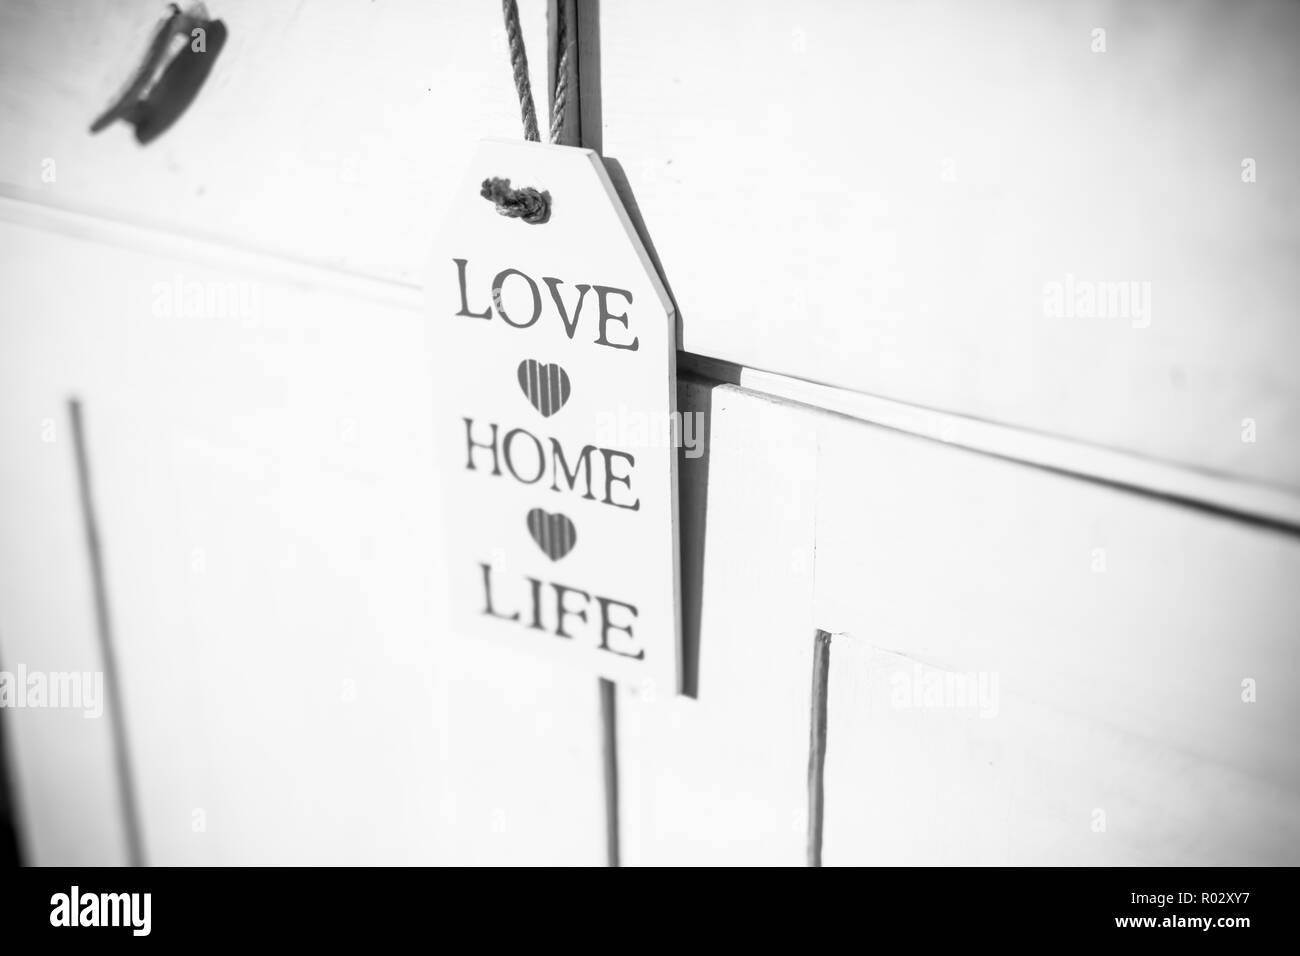 Love home life inspirational home decoration.Motivational message. Stock Photo